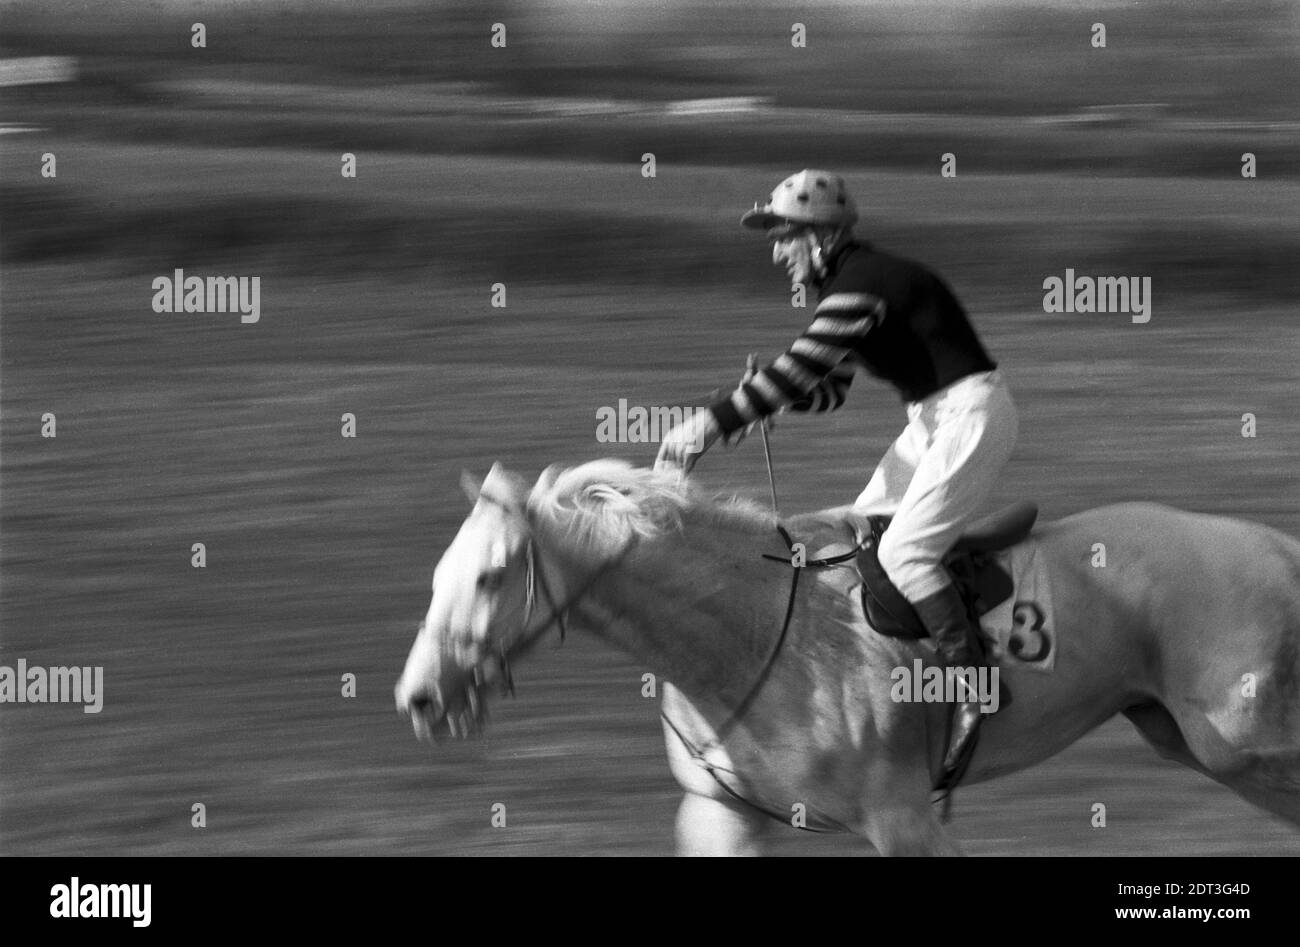 UK, England, Devonshire, Buckfastleigh, 1972. Point-to-Point races were held at  Dean Court on the Dean Marshes, close to the A38 between Plymouth and Exeter. A competing rider. Stock Photo